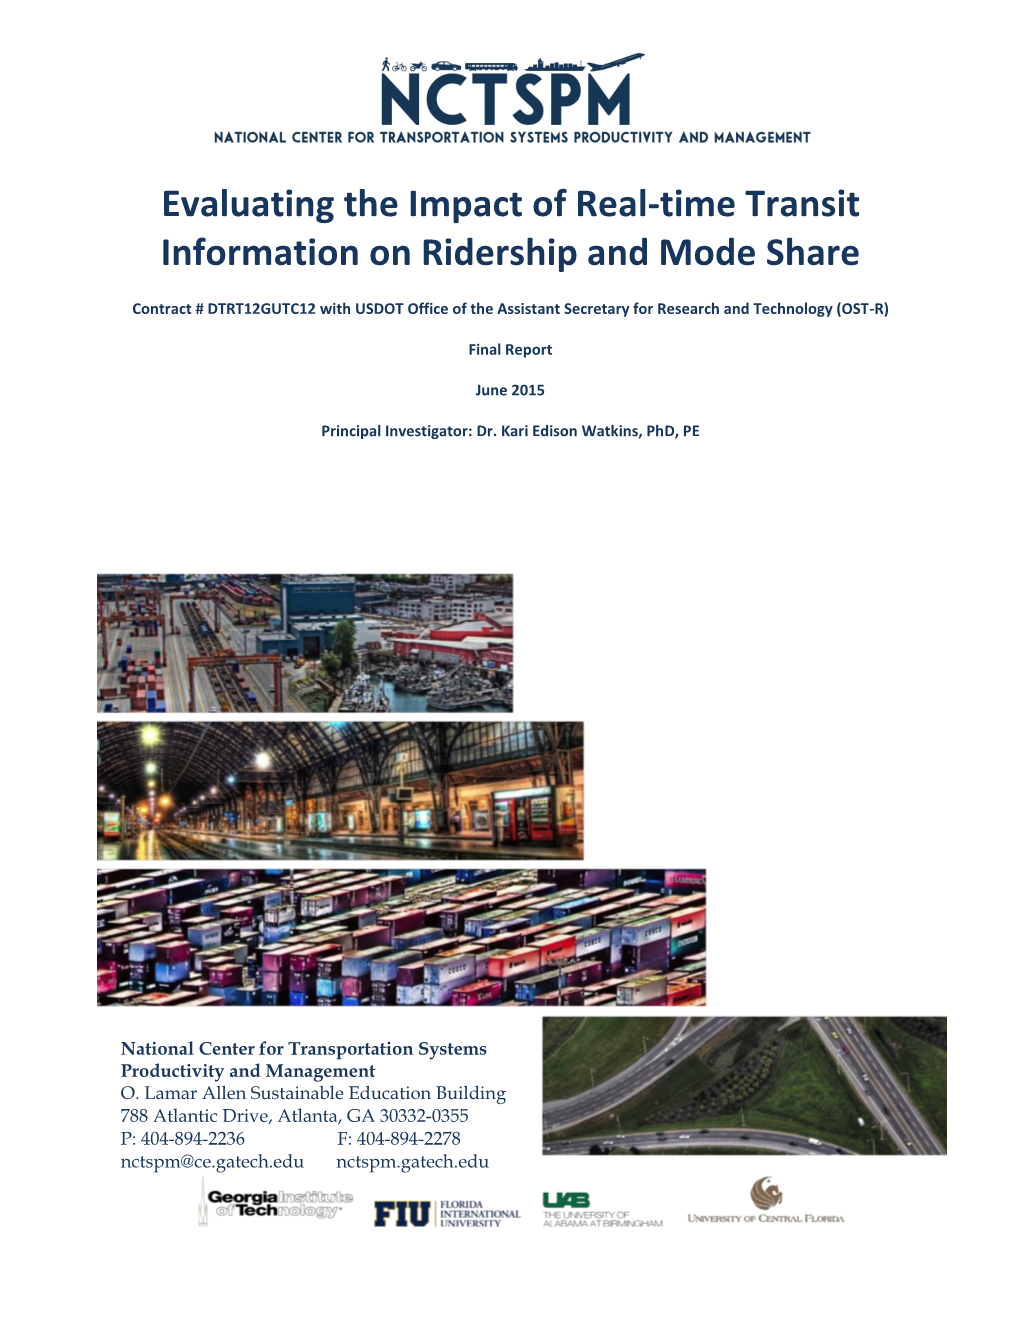 Evaluating the Impact of Real-Time Transit Information on Ridership and Mode Share